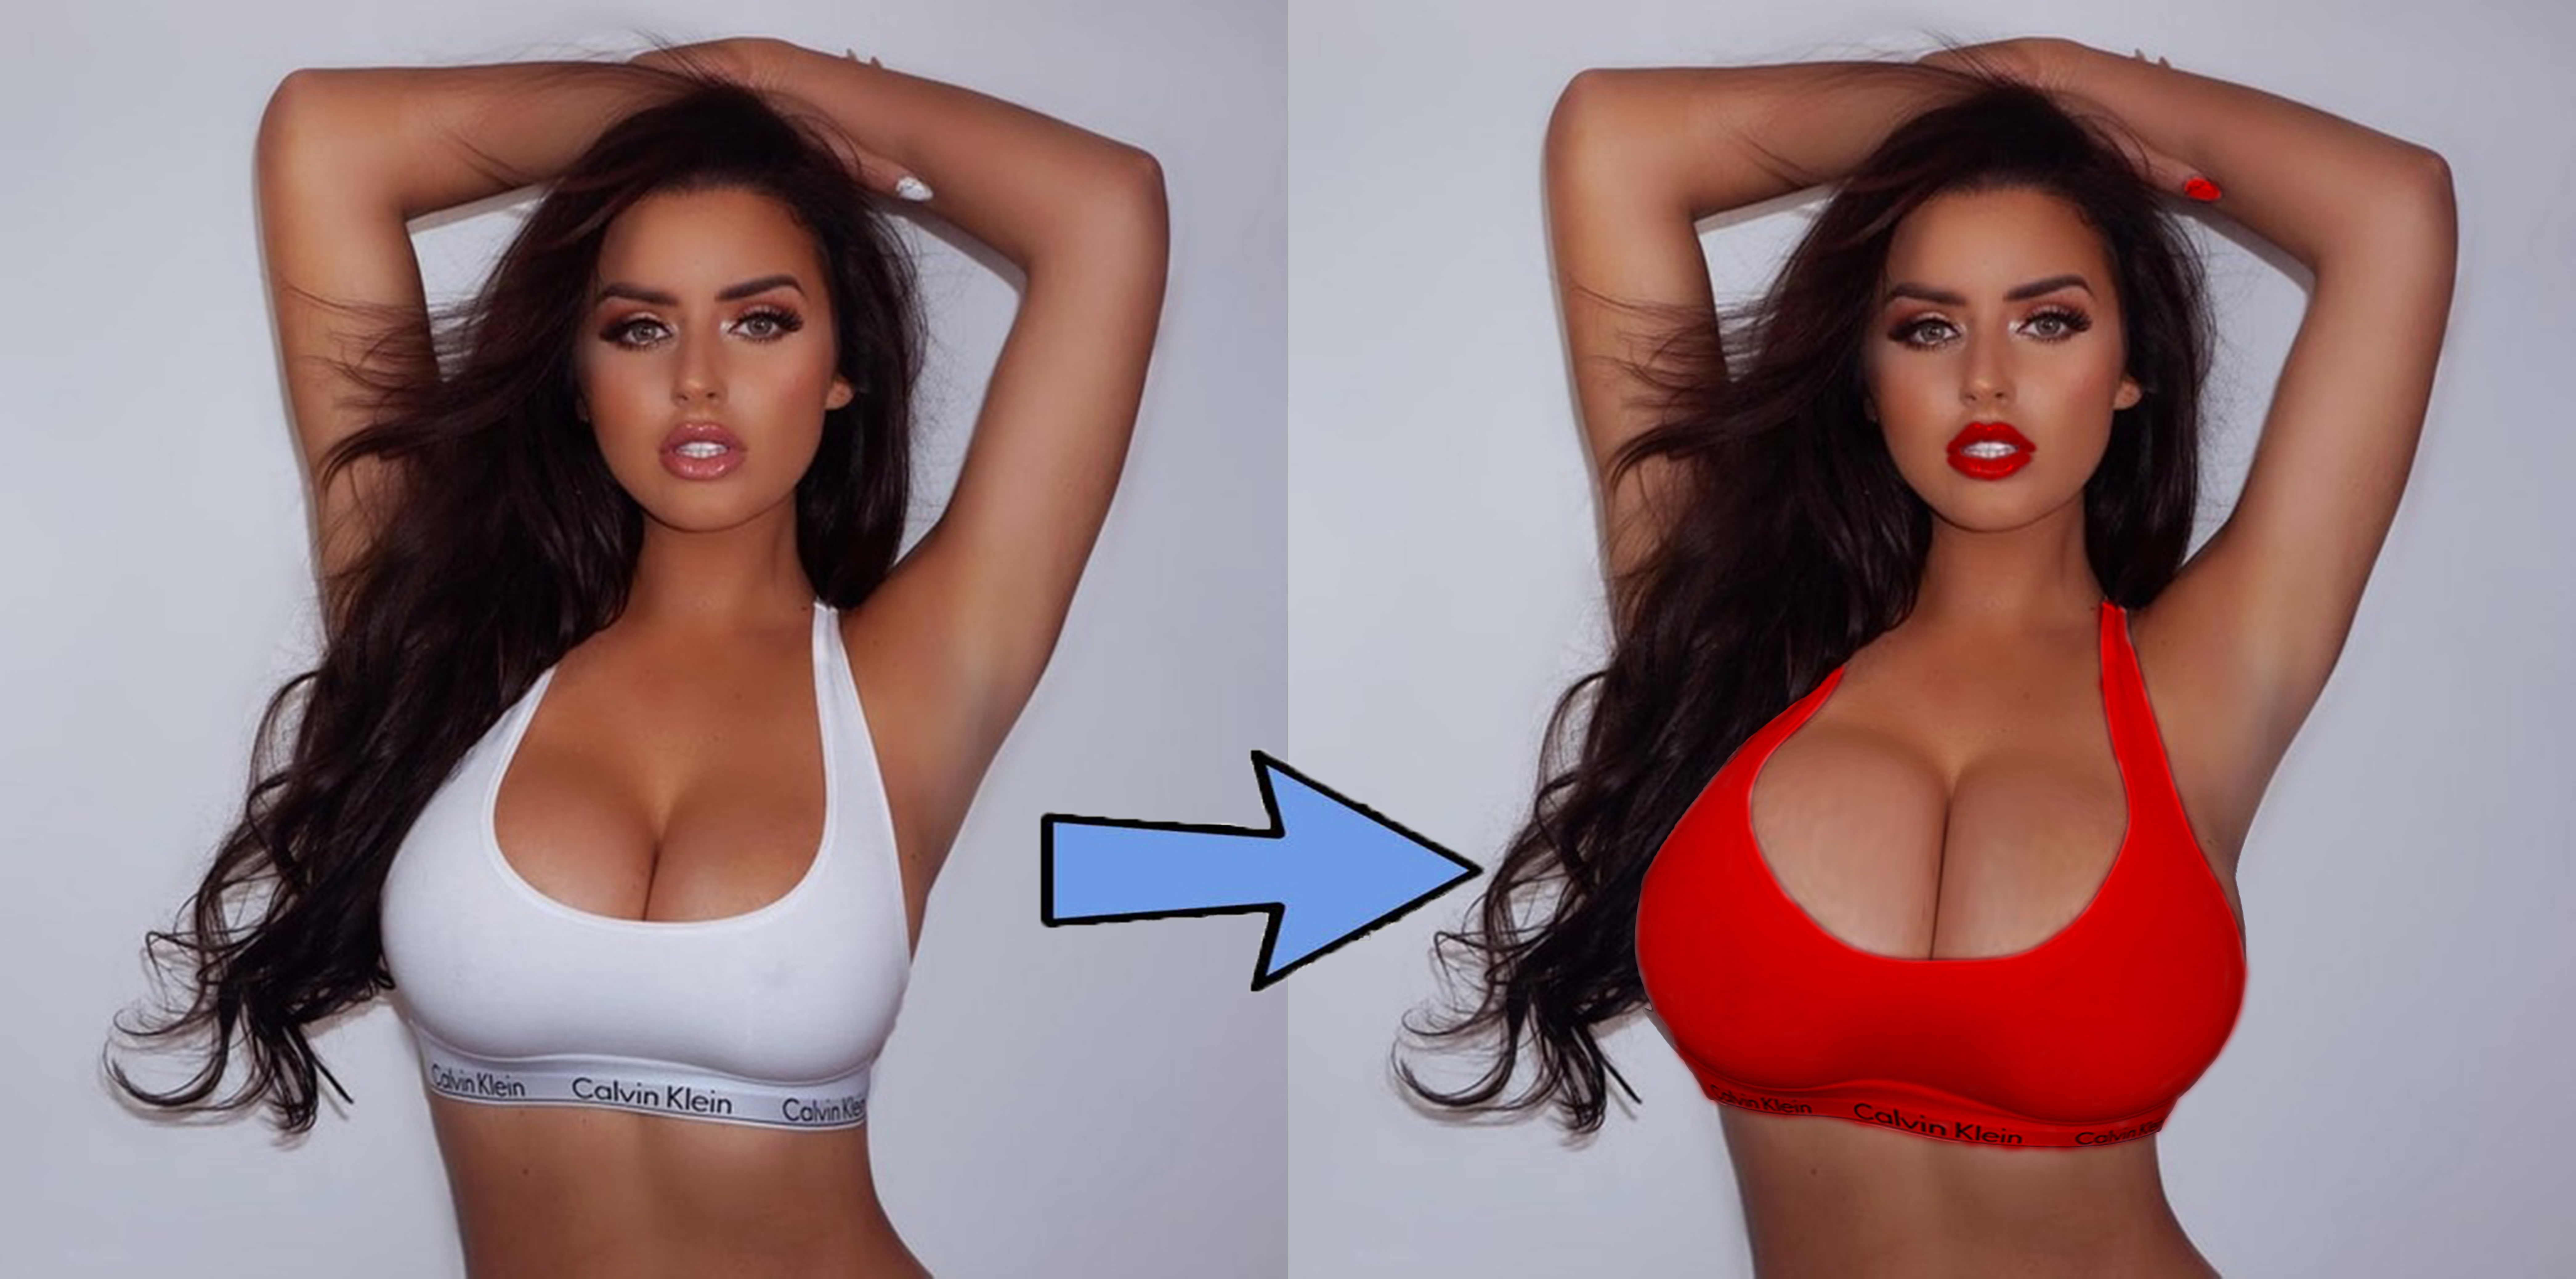 Abigail Ratchford Breast Expansion #1 by BustyPS on DeviantArt